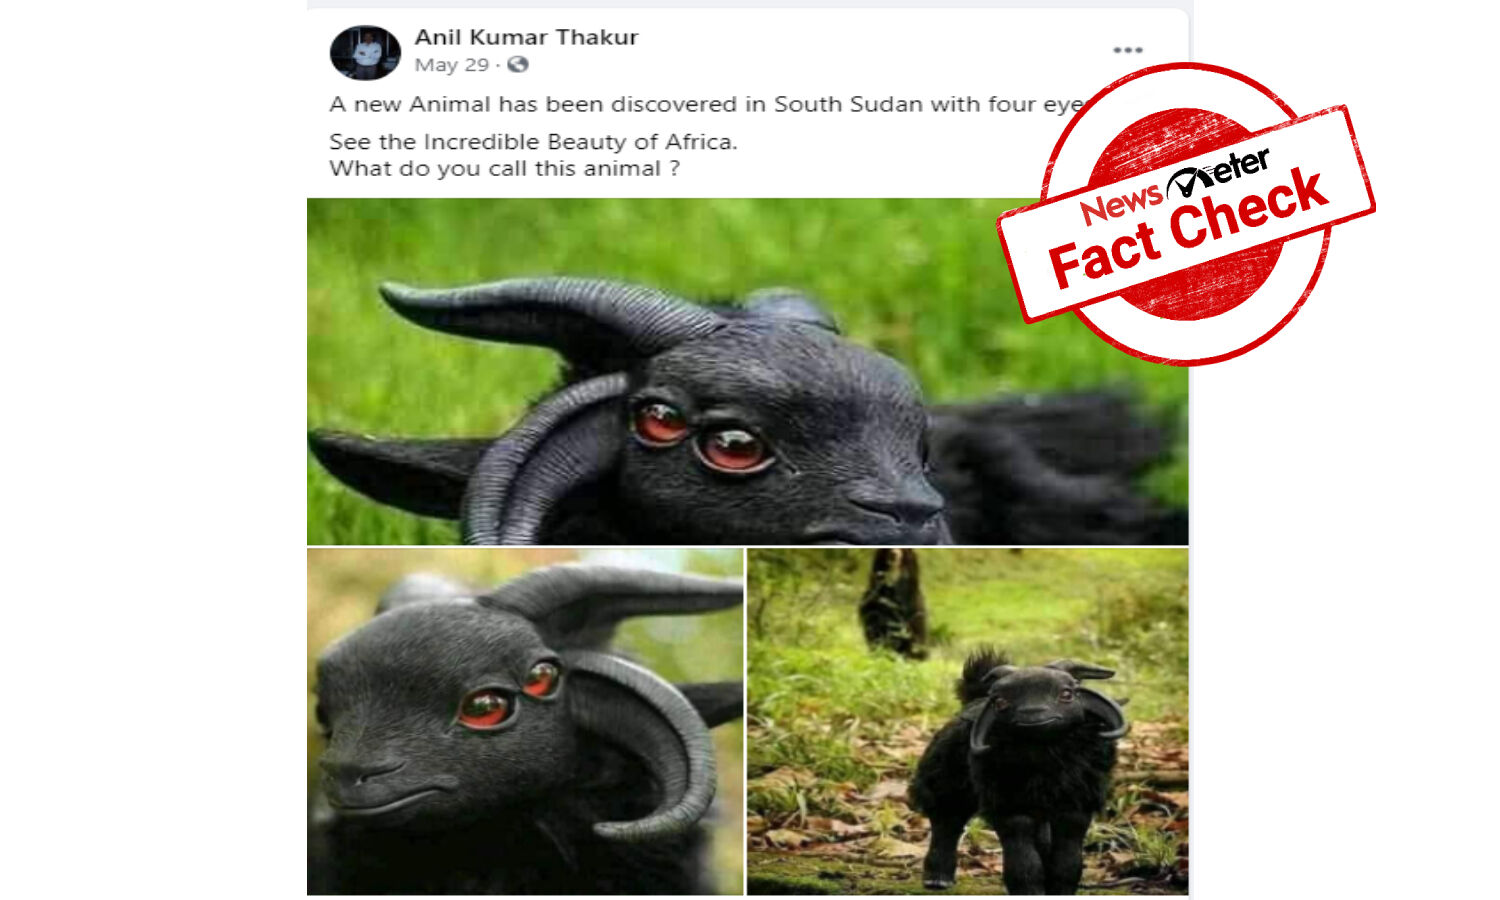 Fact Check: 4-eyed animal was not discovered in South Sudan, photo shows  sculpture of mythical creature